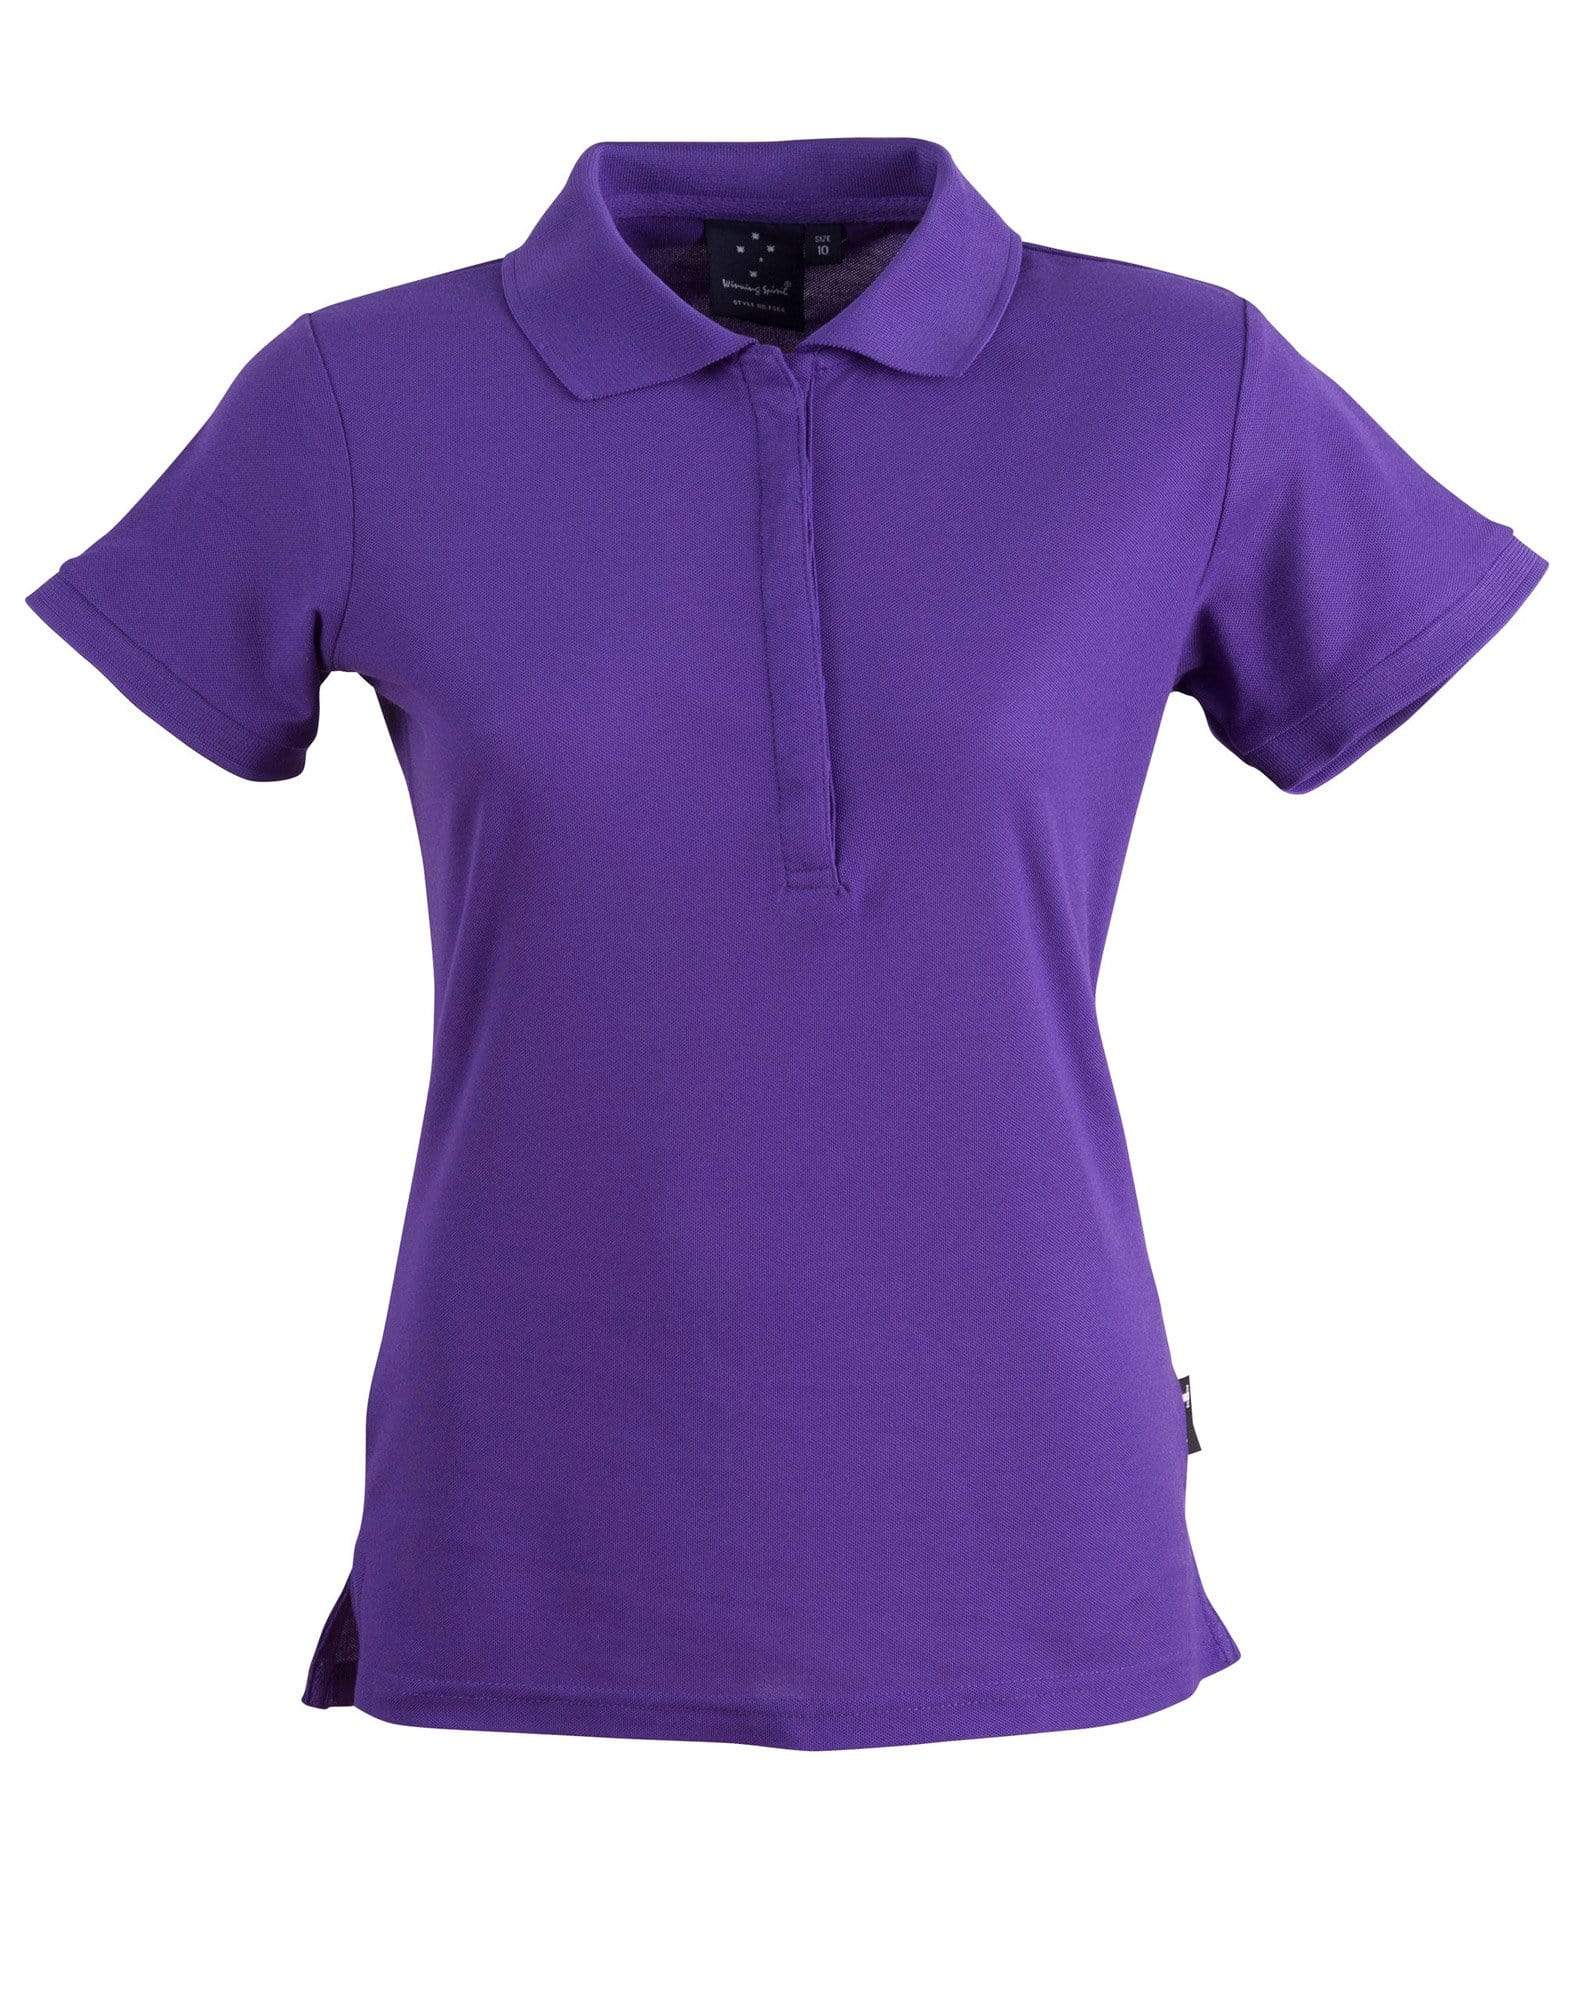 Connection Polo Ladies' Ps64 Casual Wear Winning Spirit Purple 8 